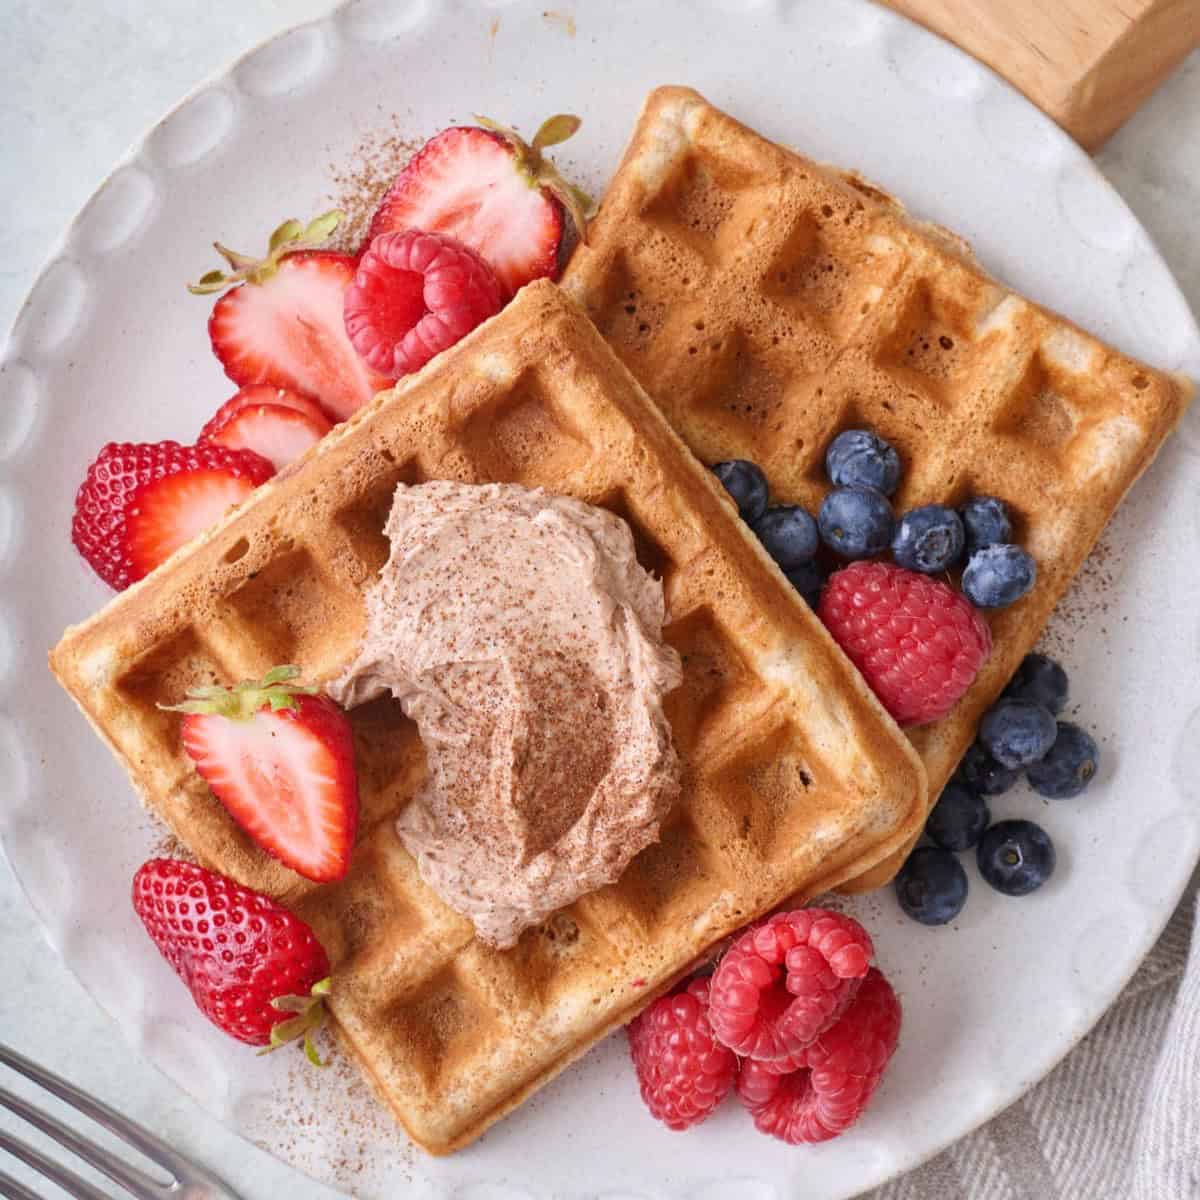 Cinnamon waffles on a plate with whipped cinnamon butter and fresh fruit.